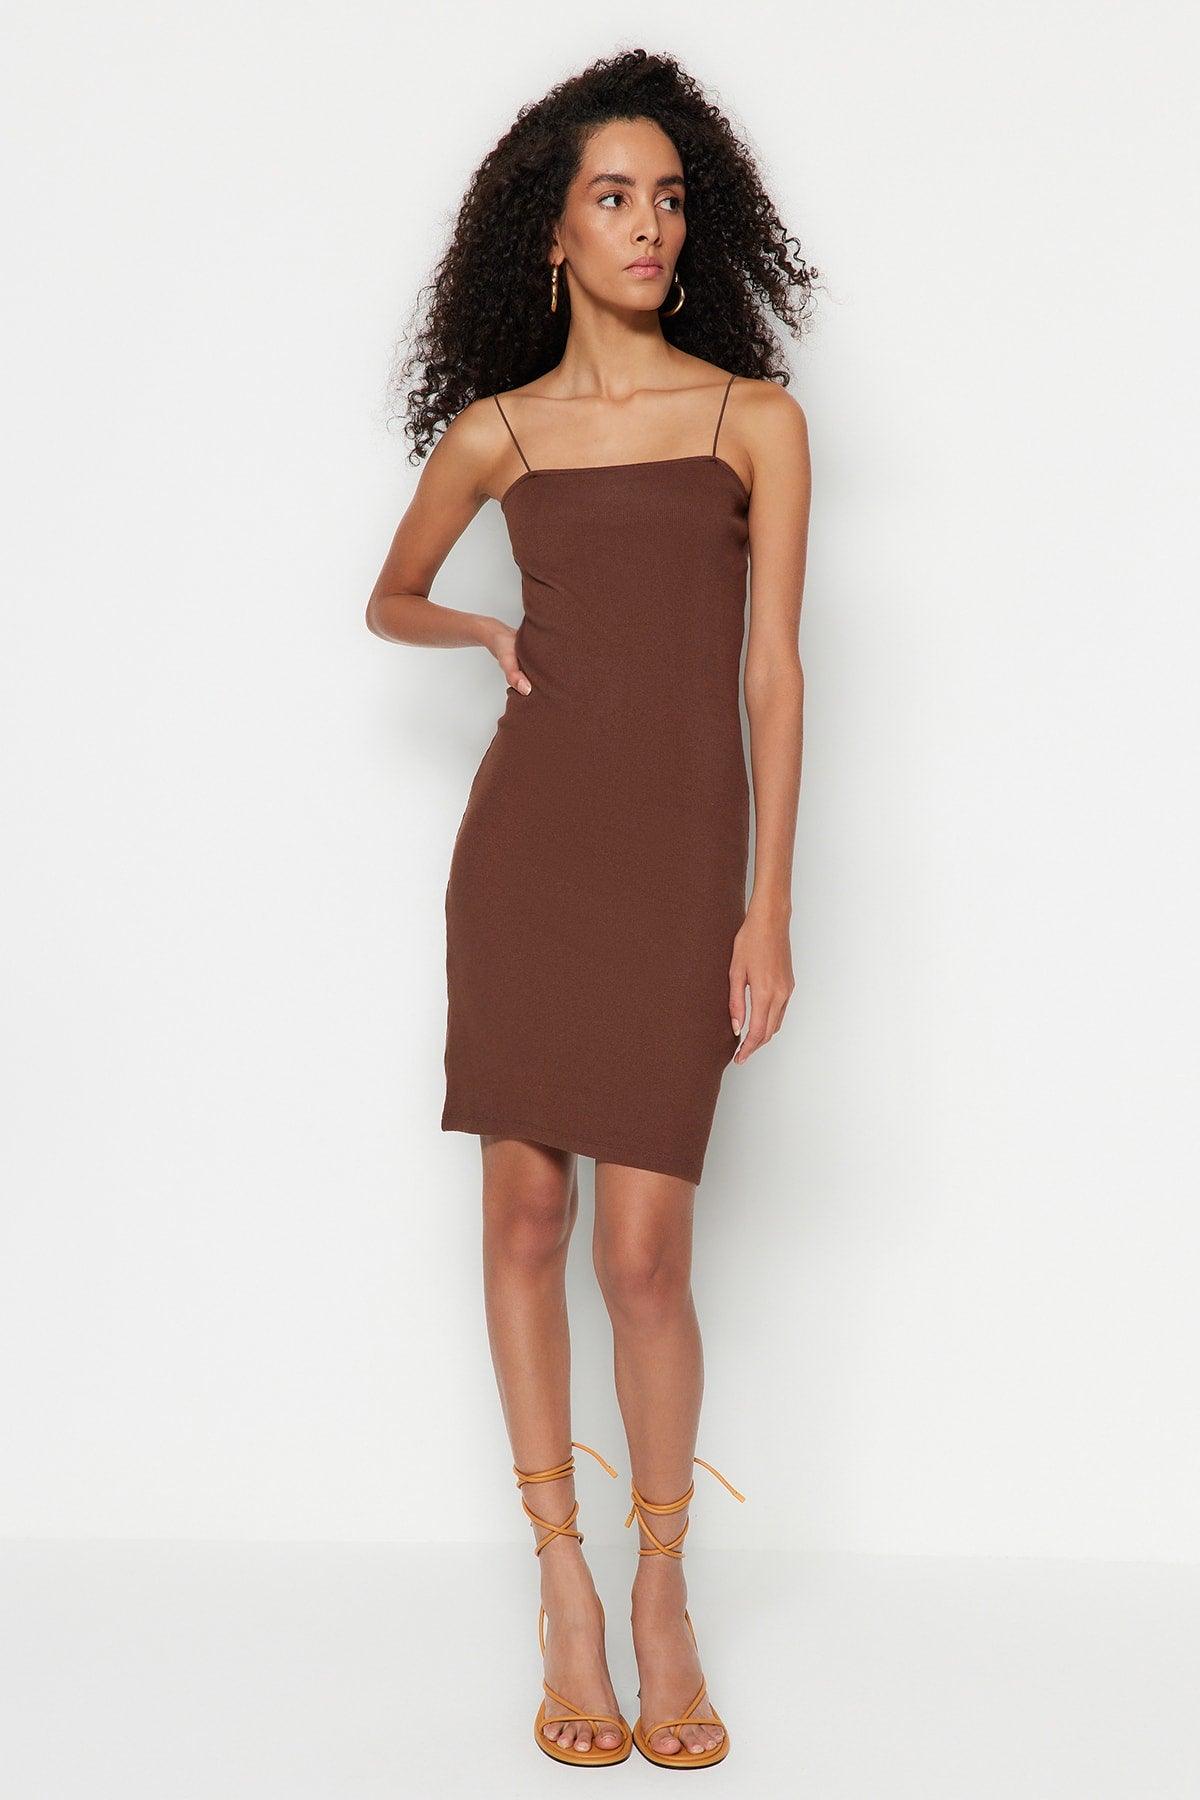 Brown Square Neck Spaghetti Strap Ribbed Flexible Fitted Mini Knitted Dress TWOSS21EL2327 - Swordslife